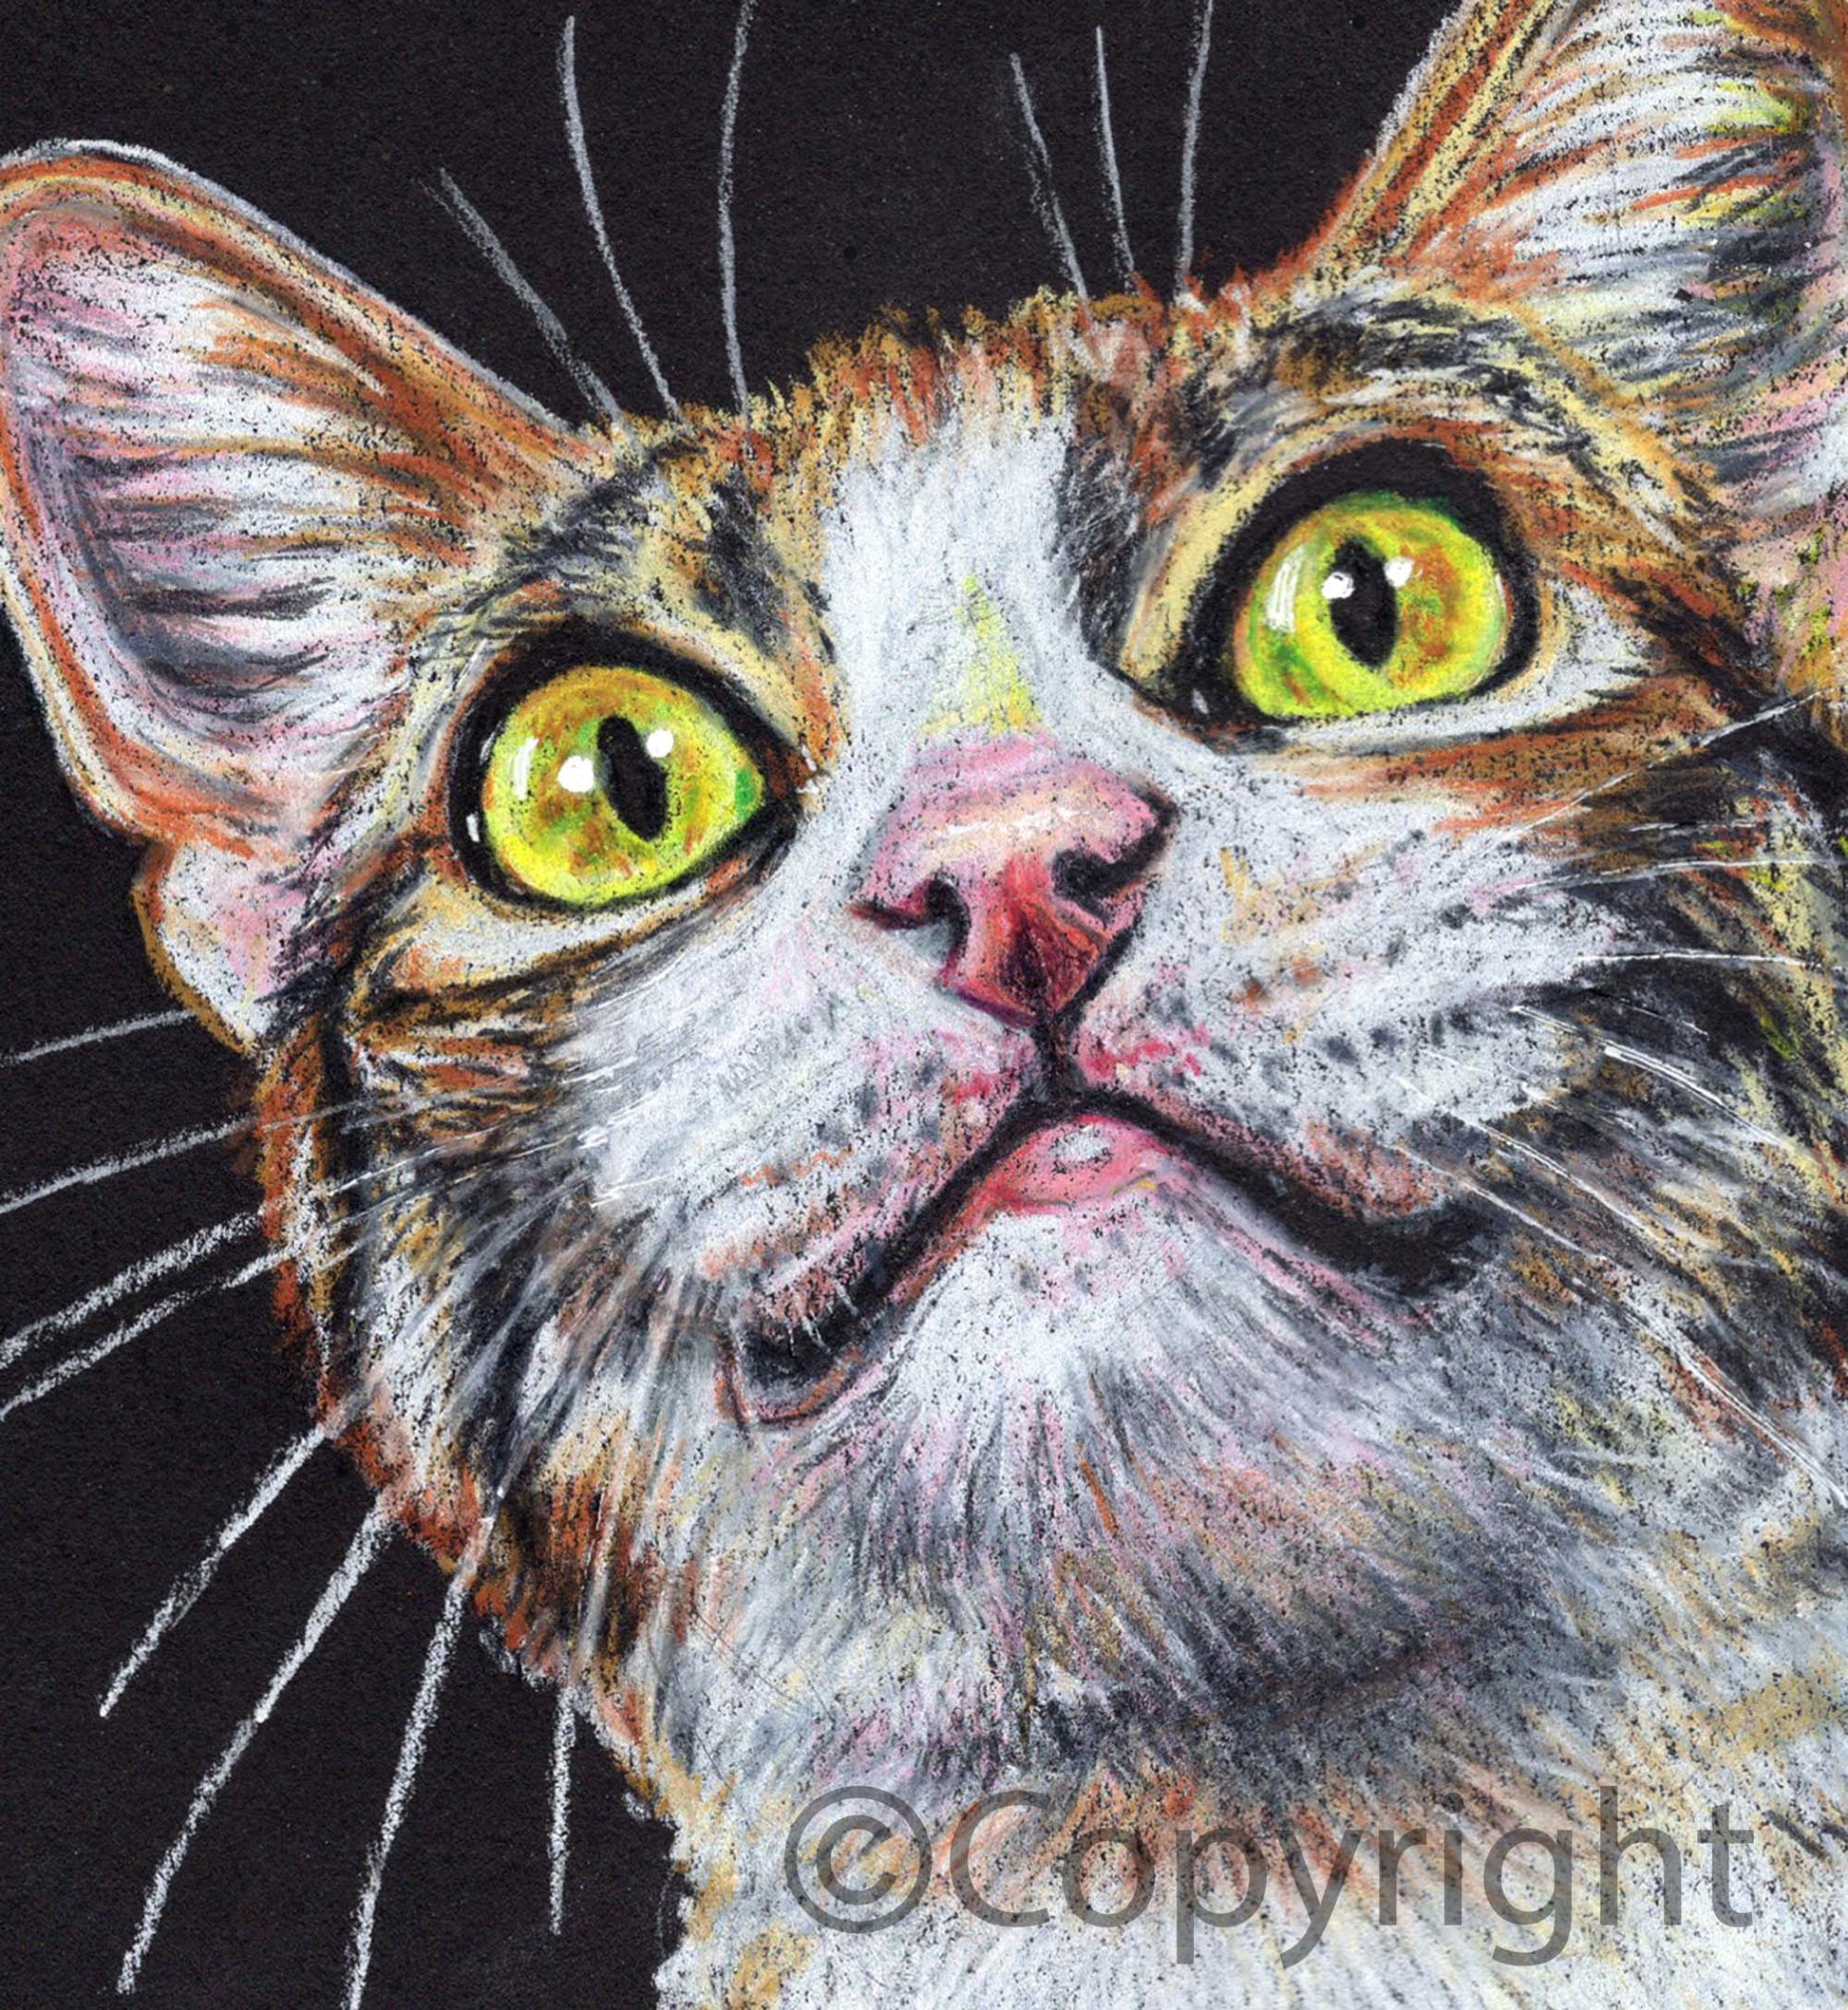 Crayon drawing of an adorable calico cat with big yellow eyes on a black background. Art by Deidre Wicks